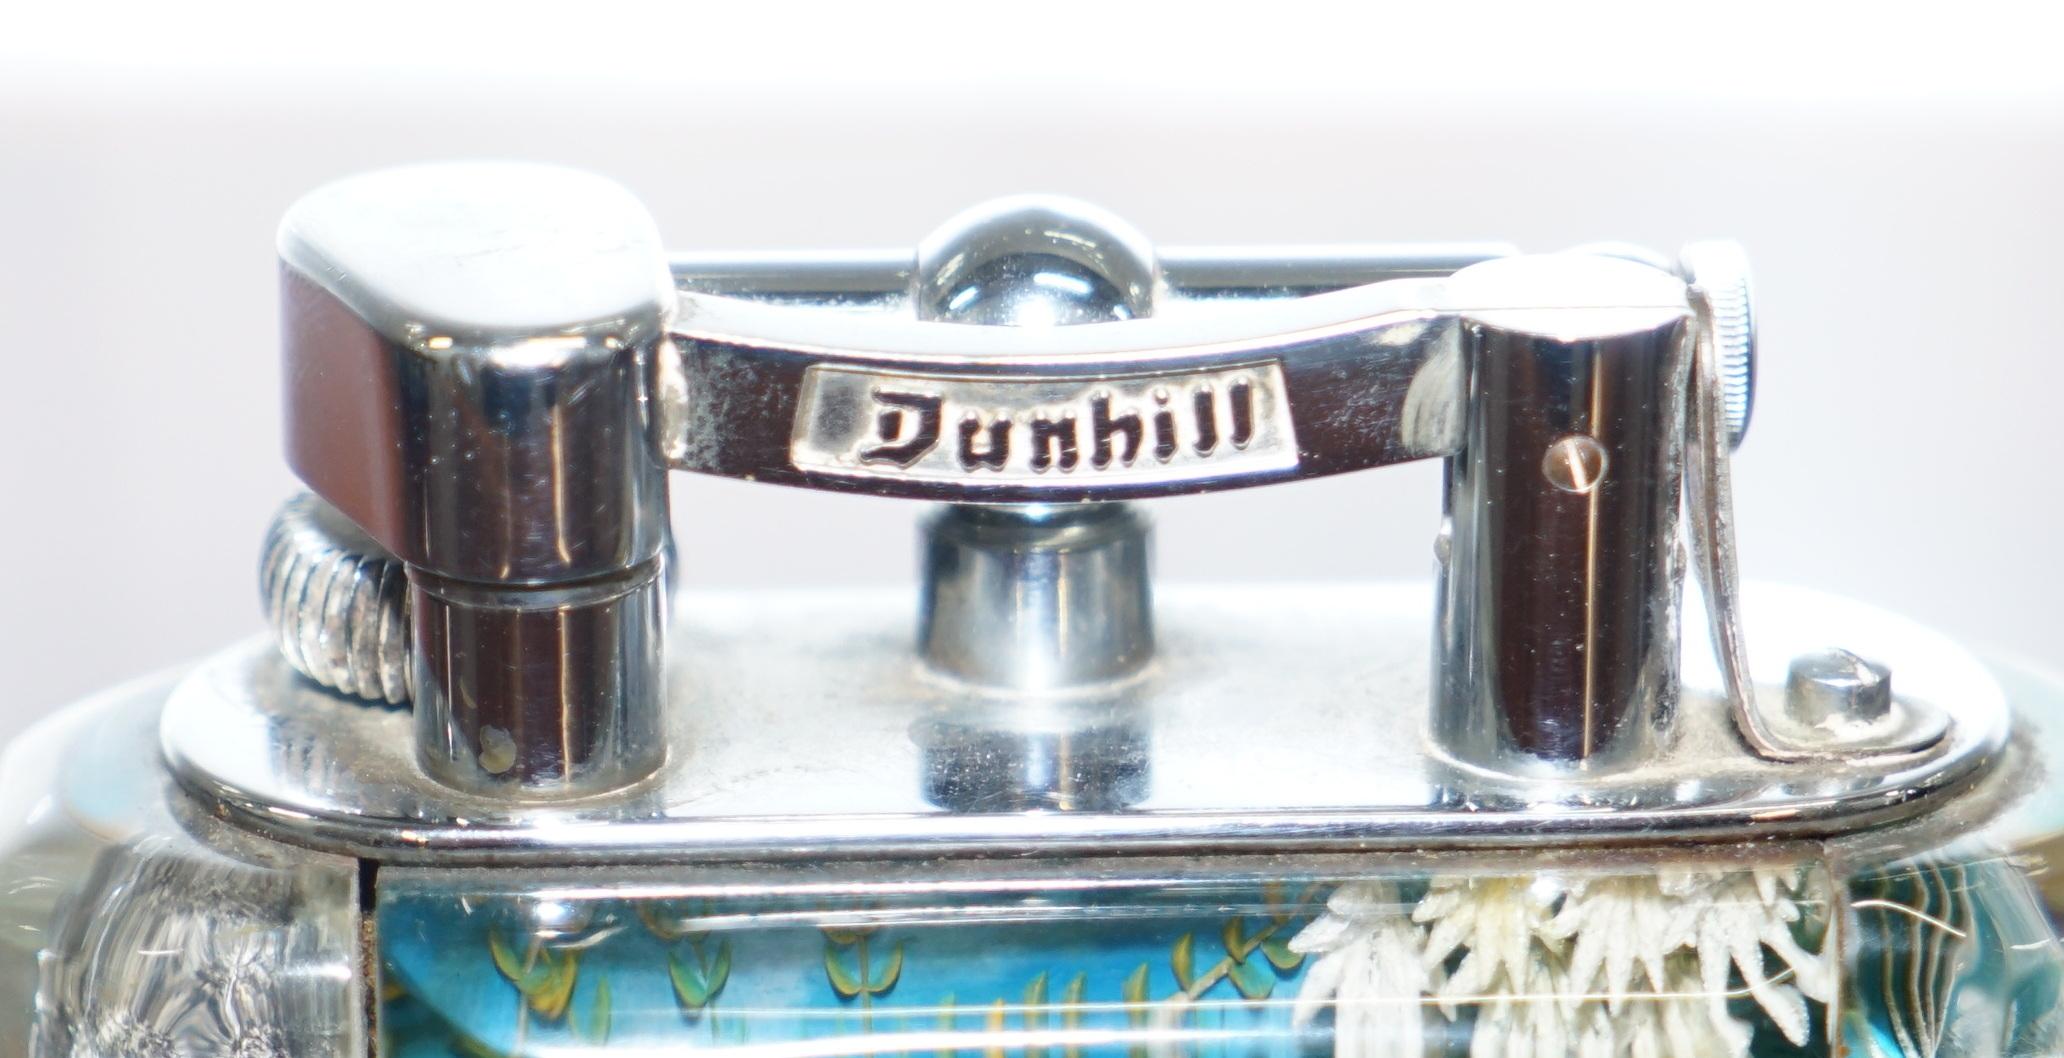 Mid-Century Modern 1950s Dunhill Aquarium Oversized Table Lighter Made in England Chrome Lots Fish